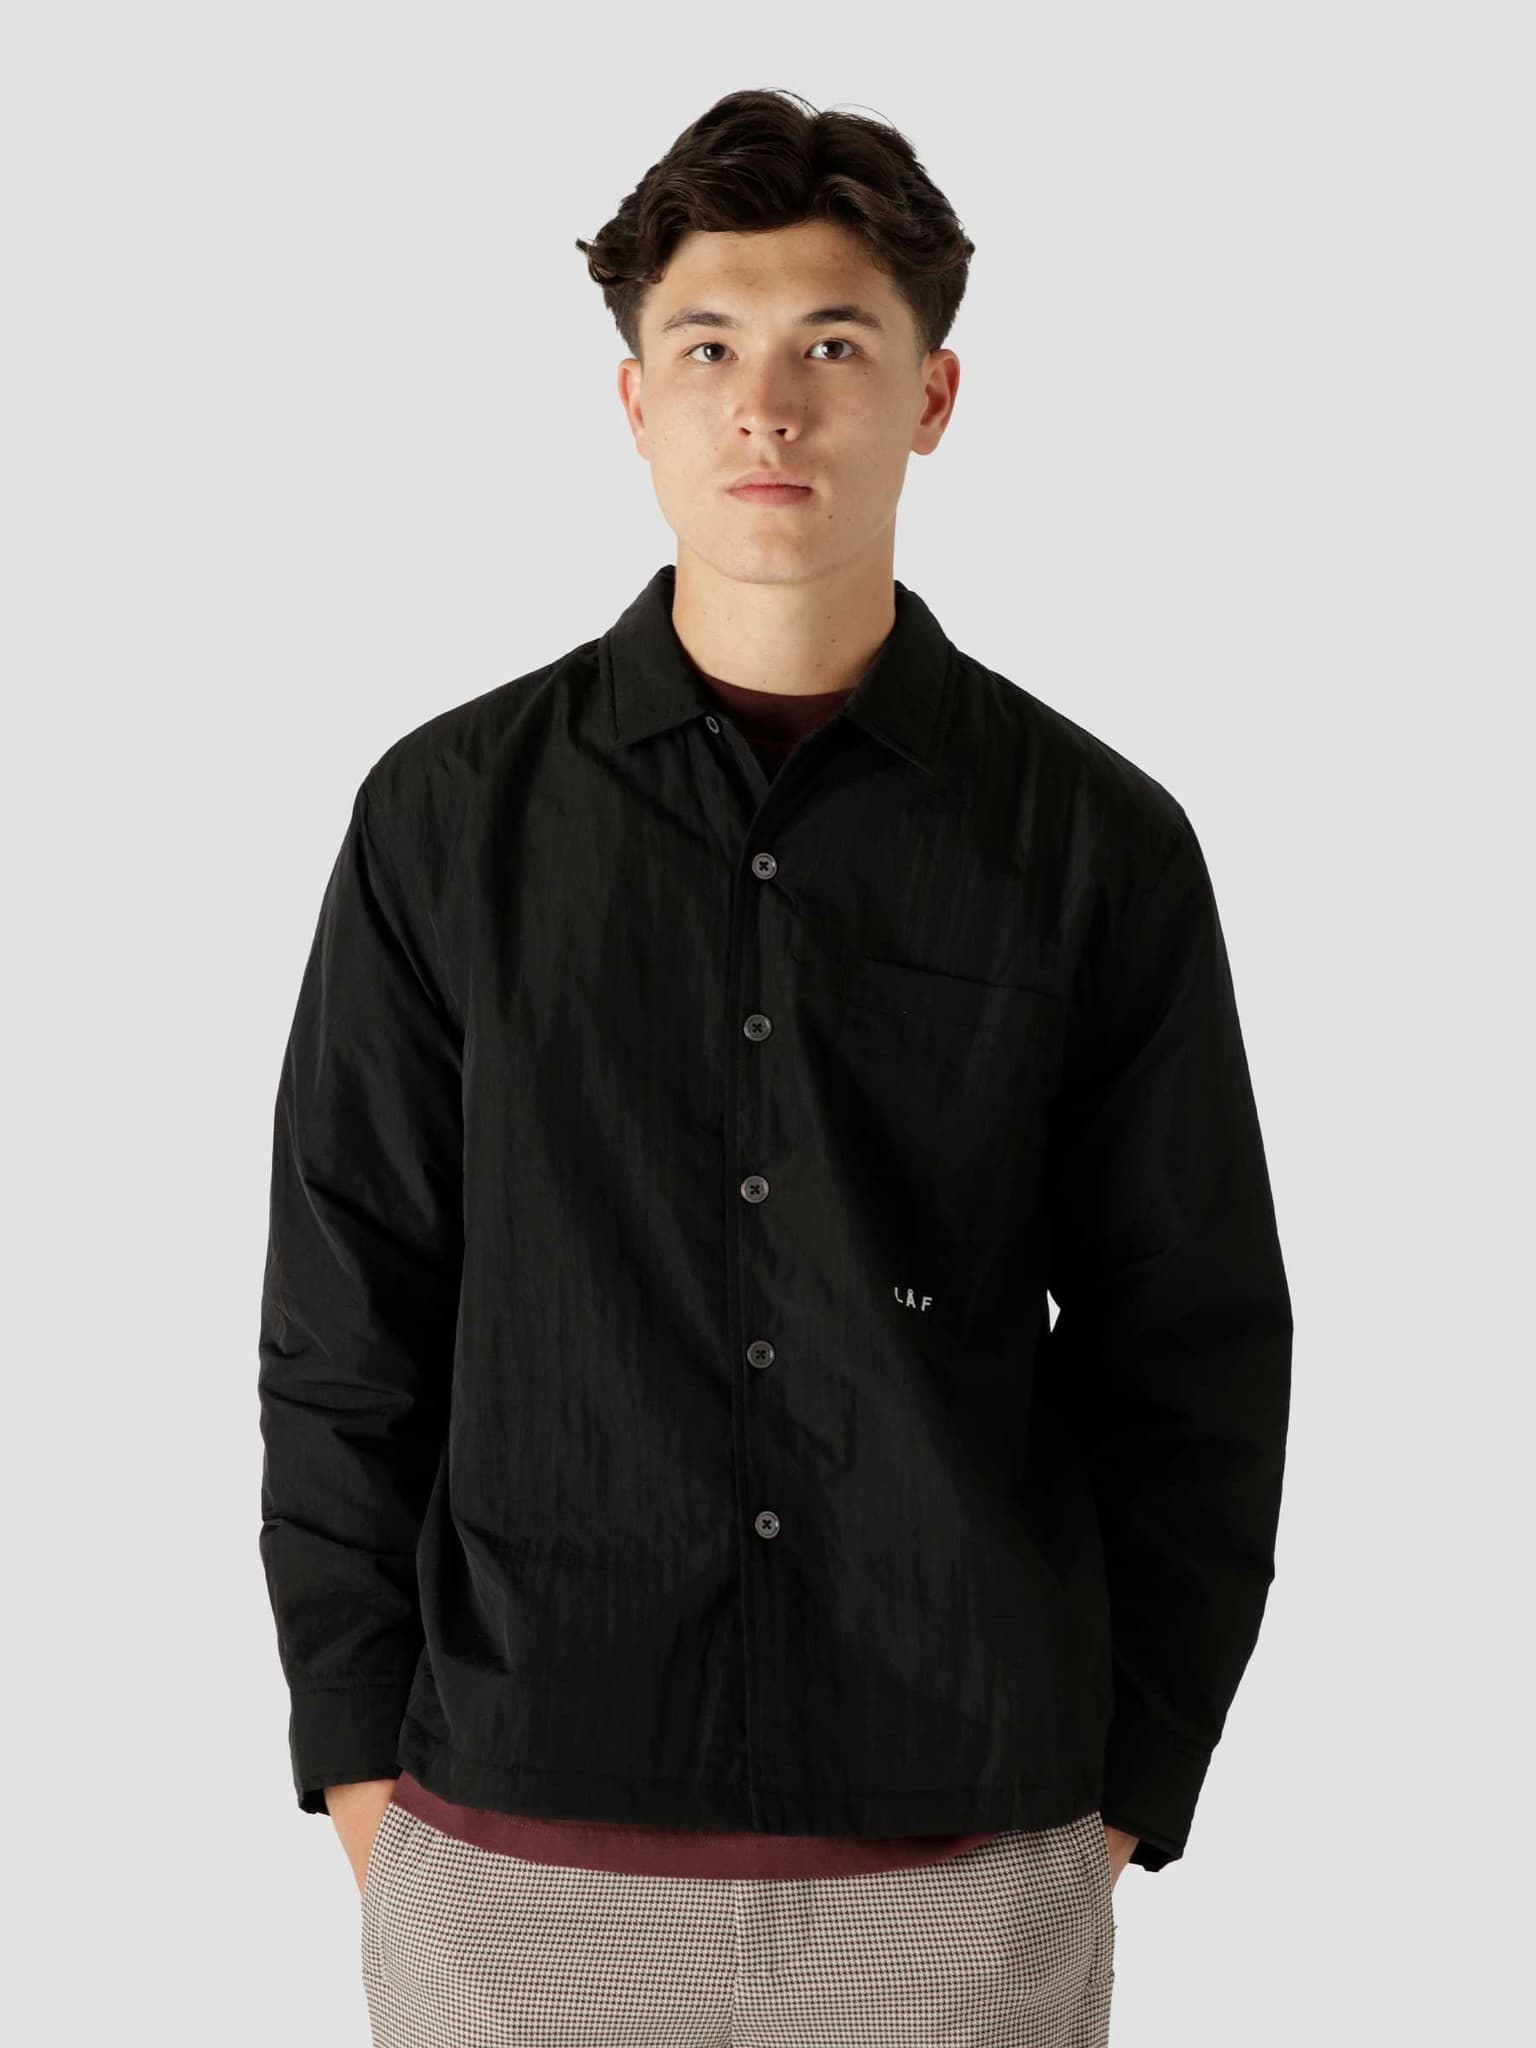 OLAF Quilted Overshirt Black